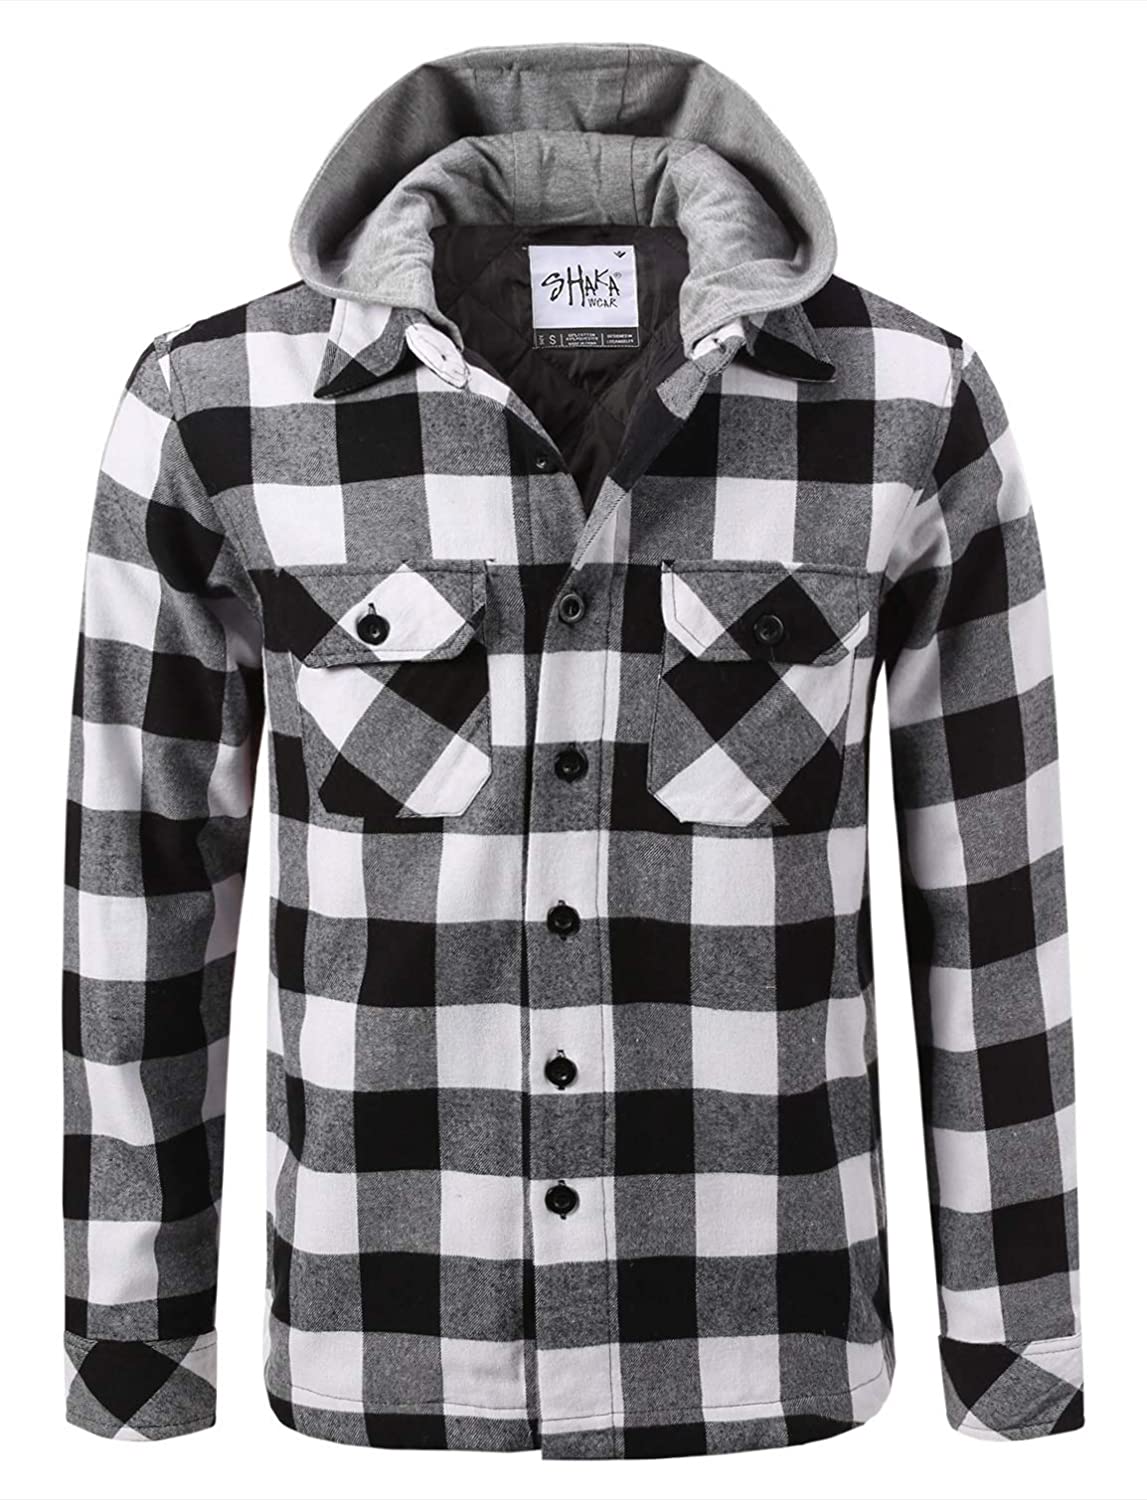 Mens Plaid Hooded Shirts Casual Long Sleeve Lightweight Shirt Jackets Button Up Relaxed Fit Hooded Quilted Shirt Jacket